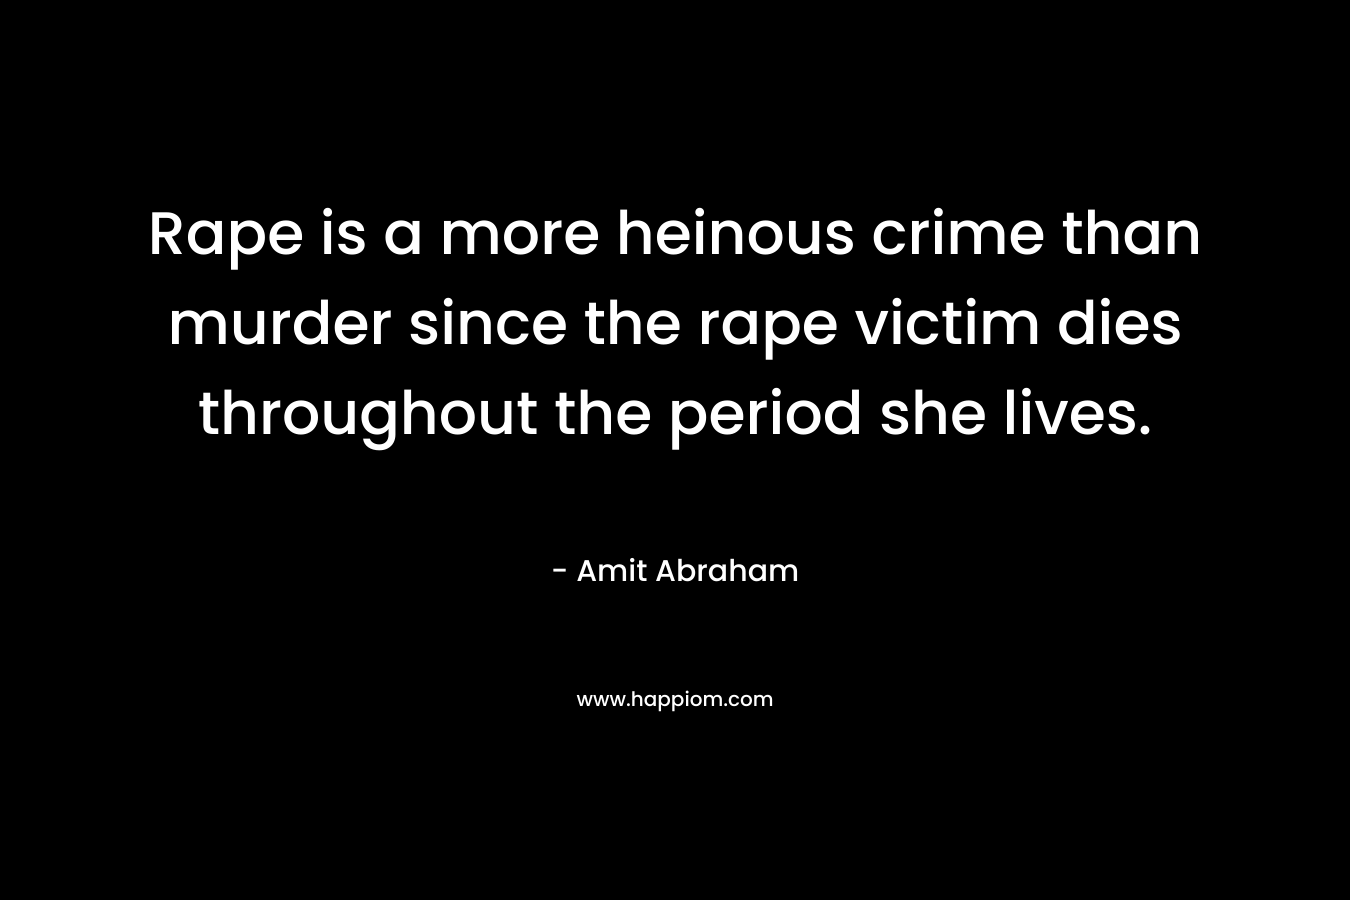 Rape is a more heinous crime than murder since the rape victim dies throughout the period she lives.